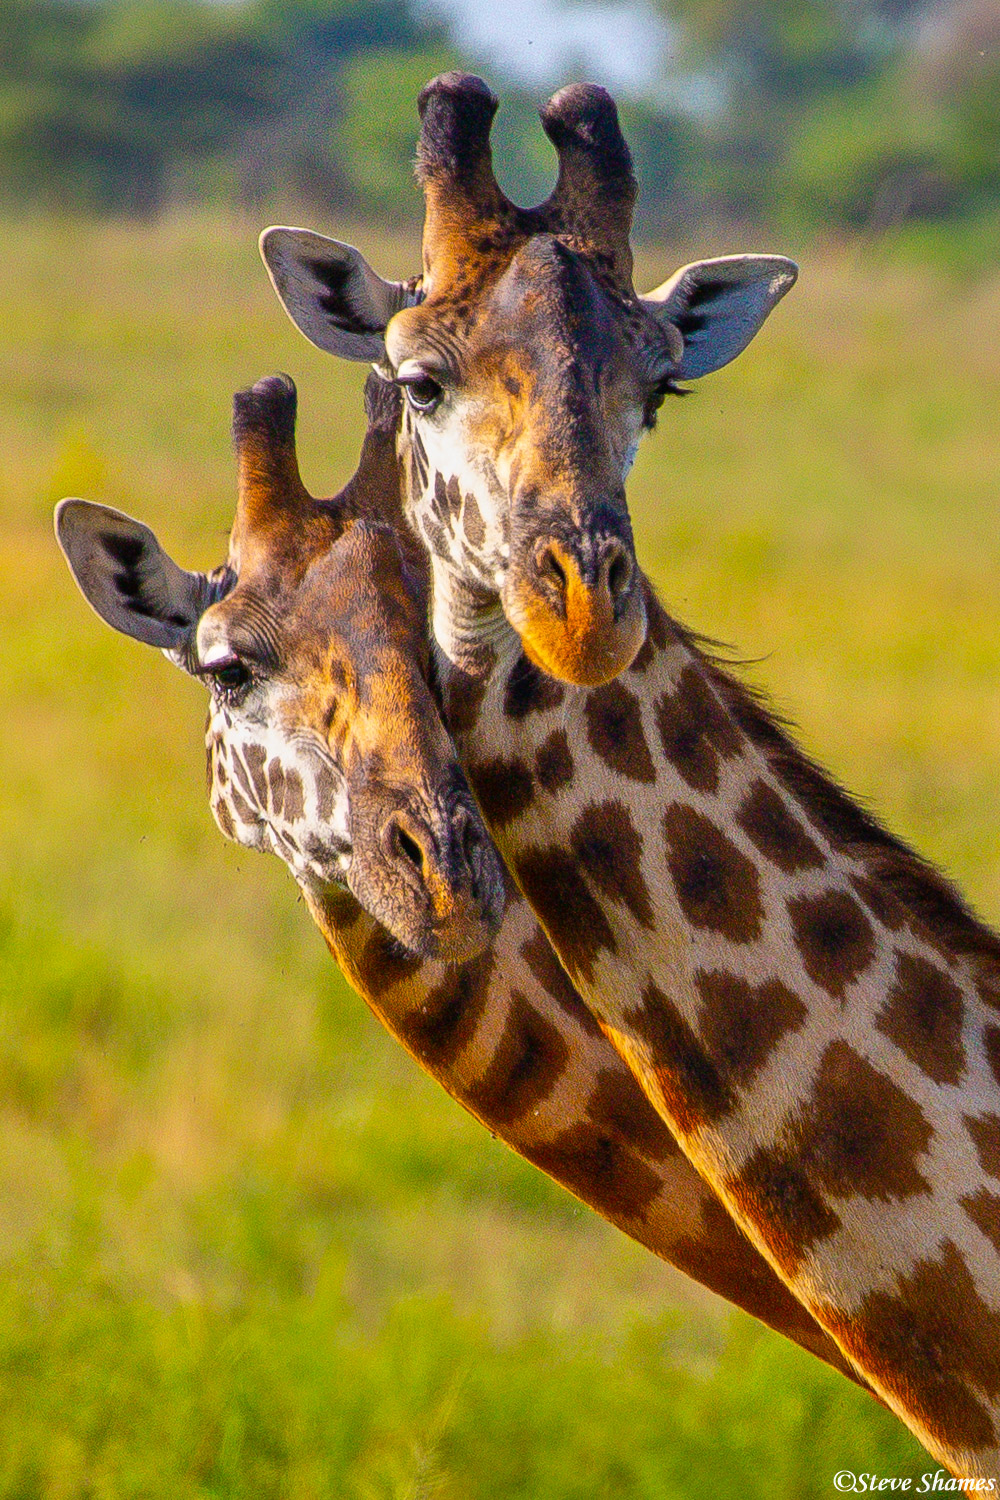 These two giraffes look to be buddies, or they just like having their heads close to each other.